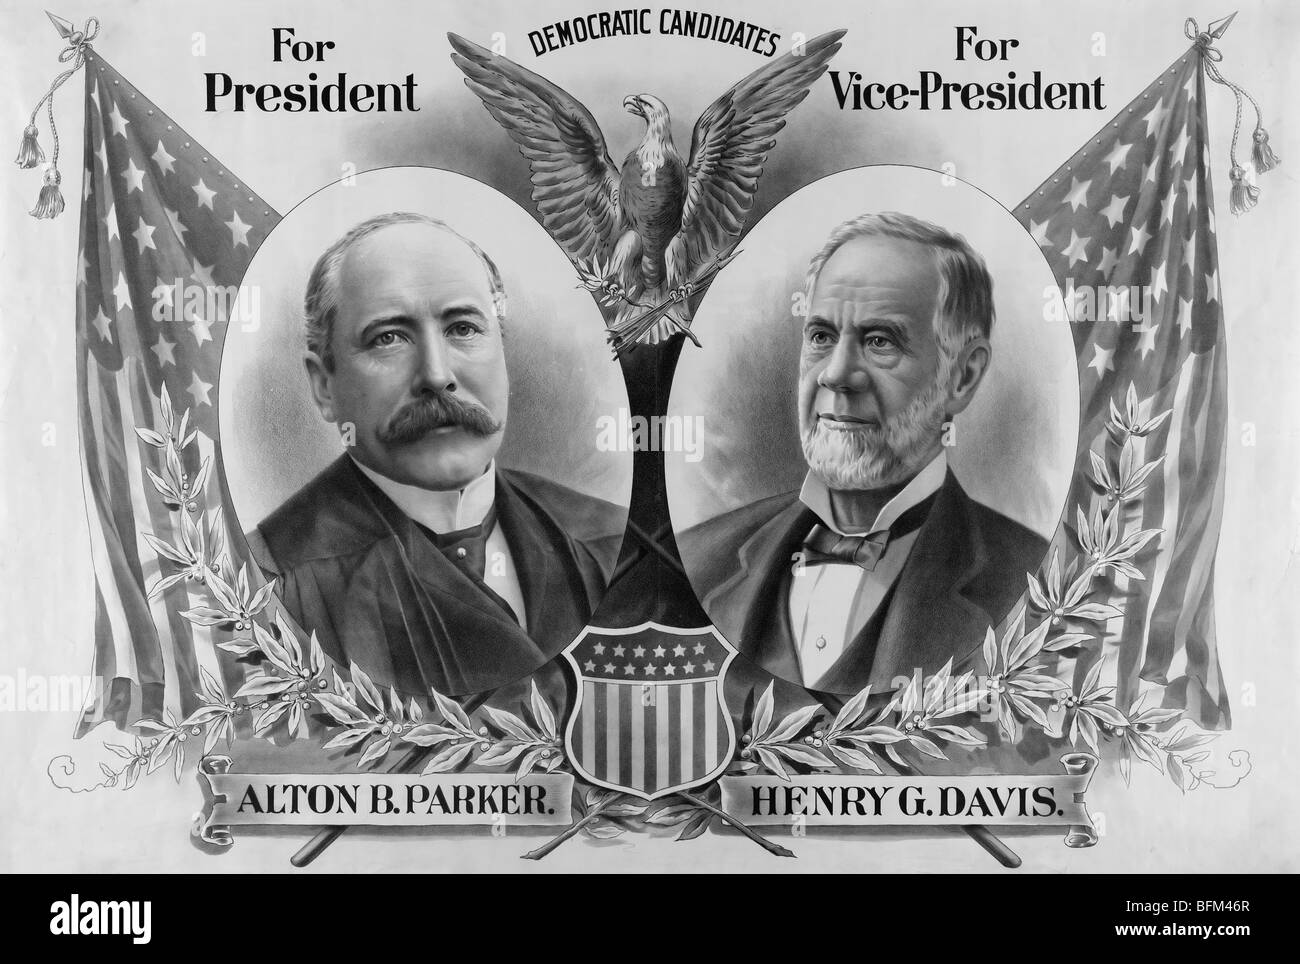 Alton Parker and Henry Davis, Democratic Candidates for President and Vice President in USA Election of 1904 Stock Photo